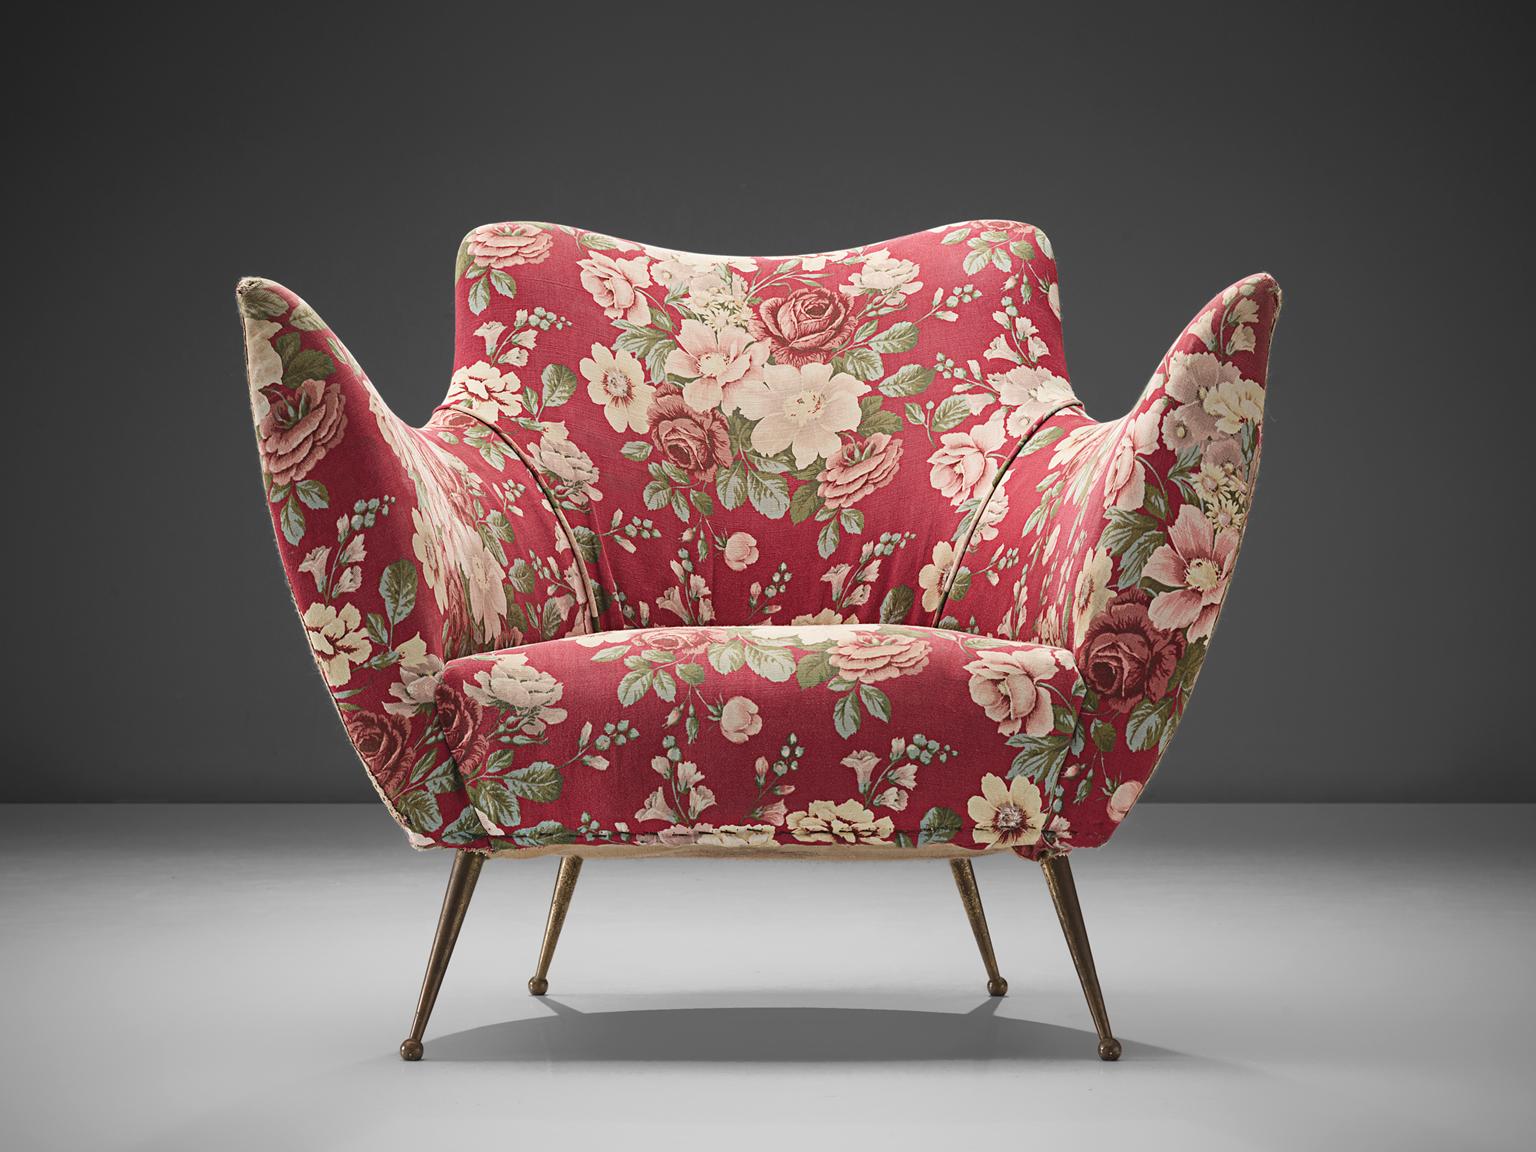 Mid-20th Century Pair of Lounge Chairs with Red Floral Upholstery by ISA Bergamo